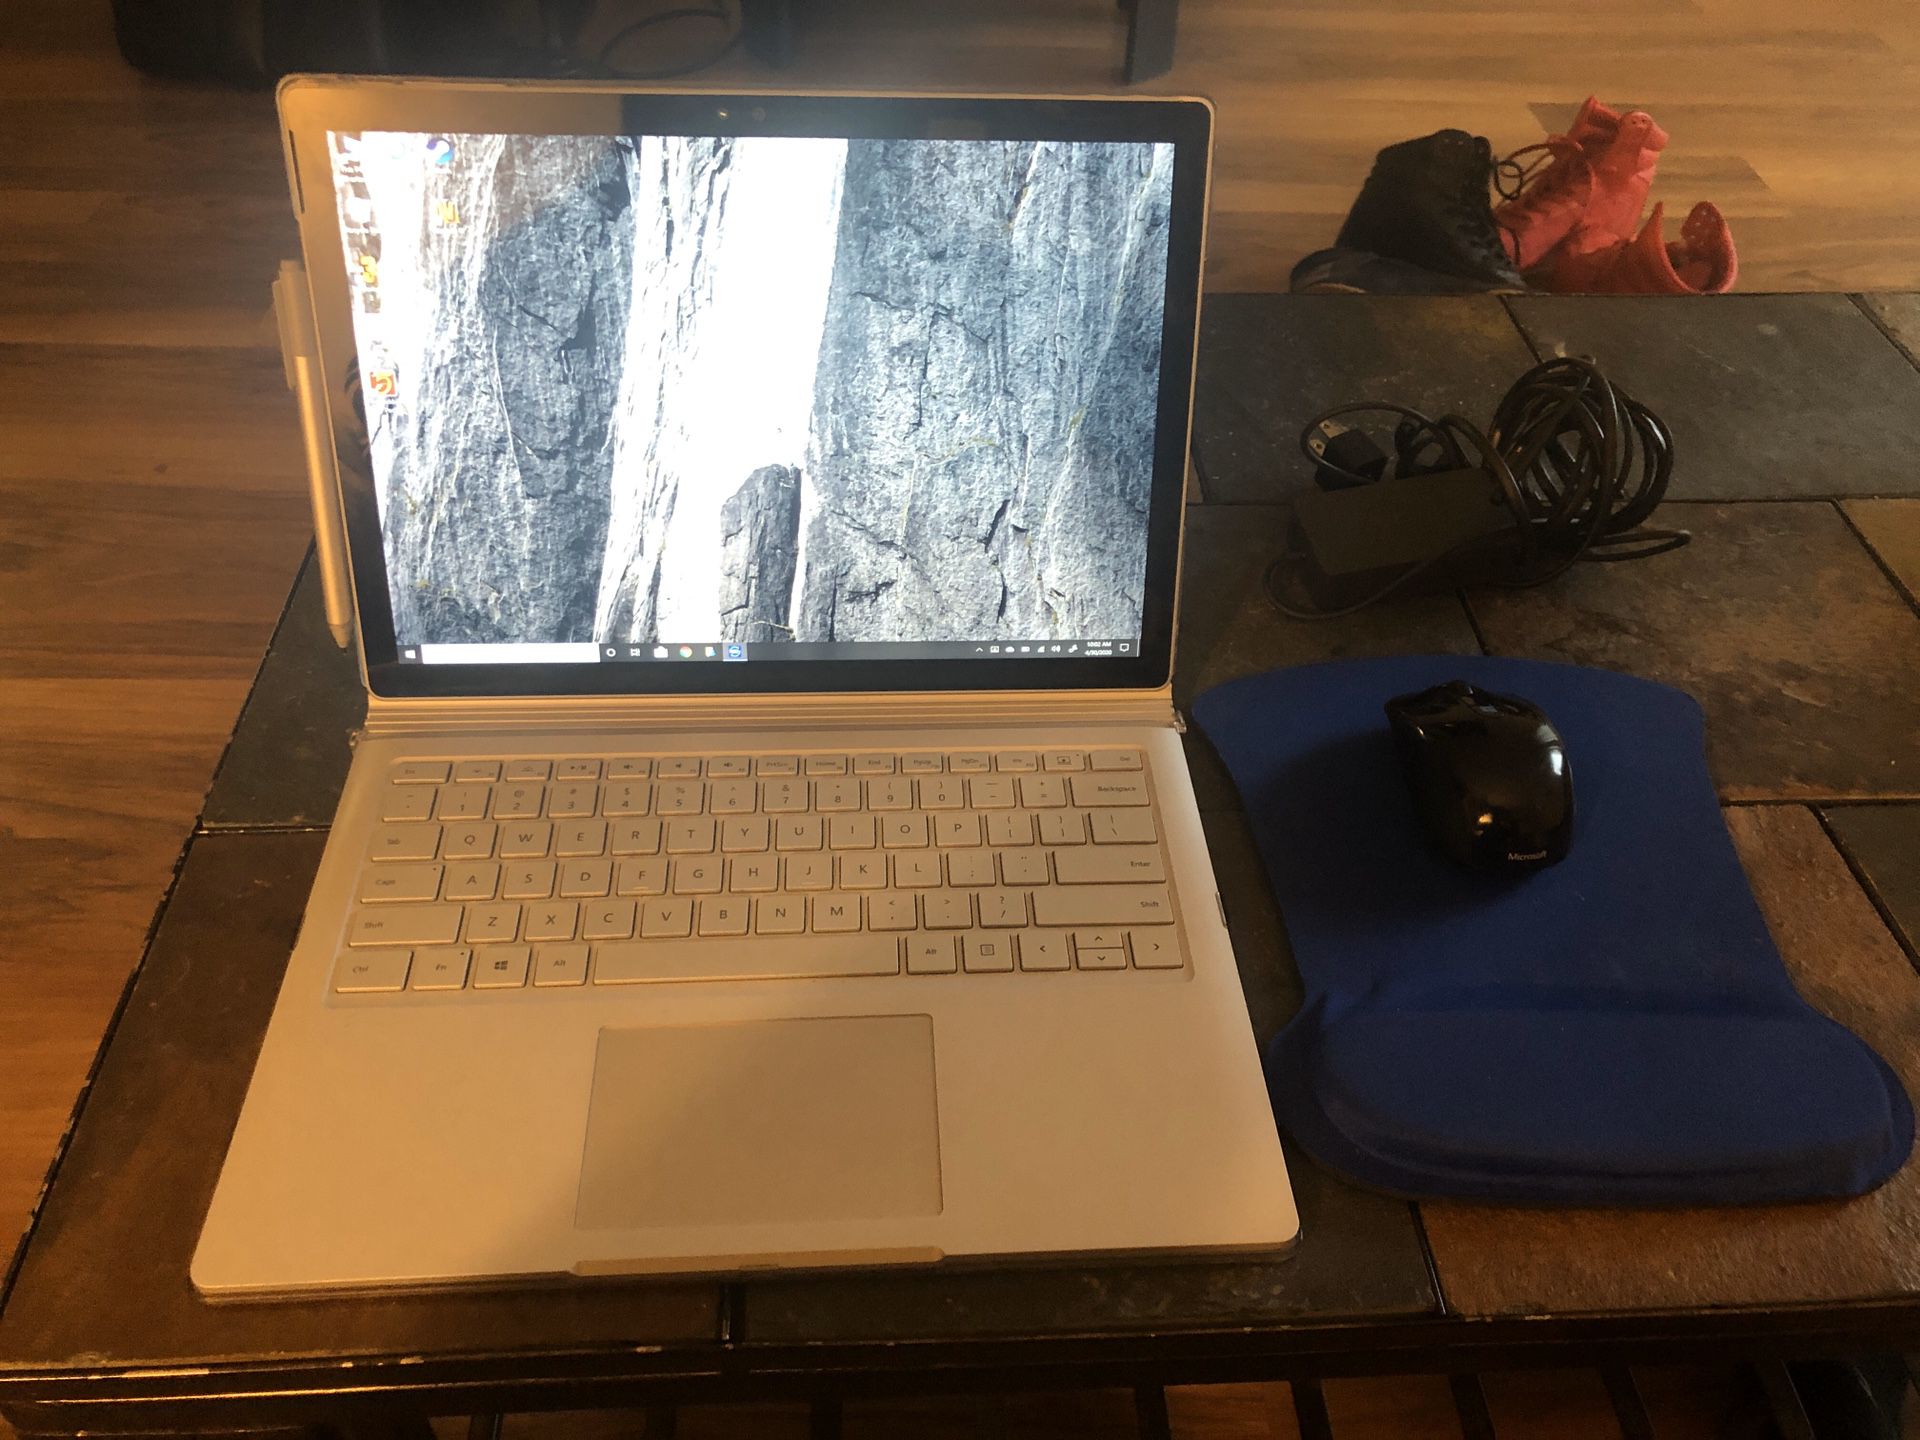 Like New 15" Surface Book 2 256GB i7 with pen, charger, mouse, hard case, and wireless display